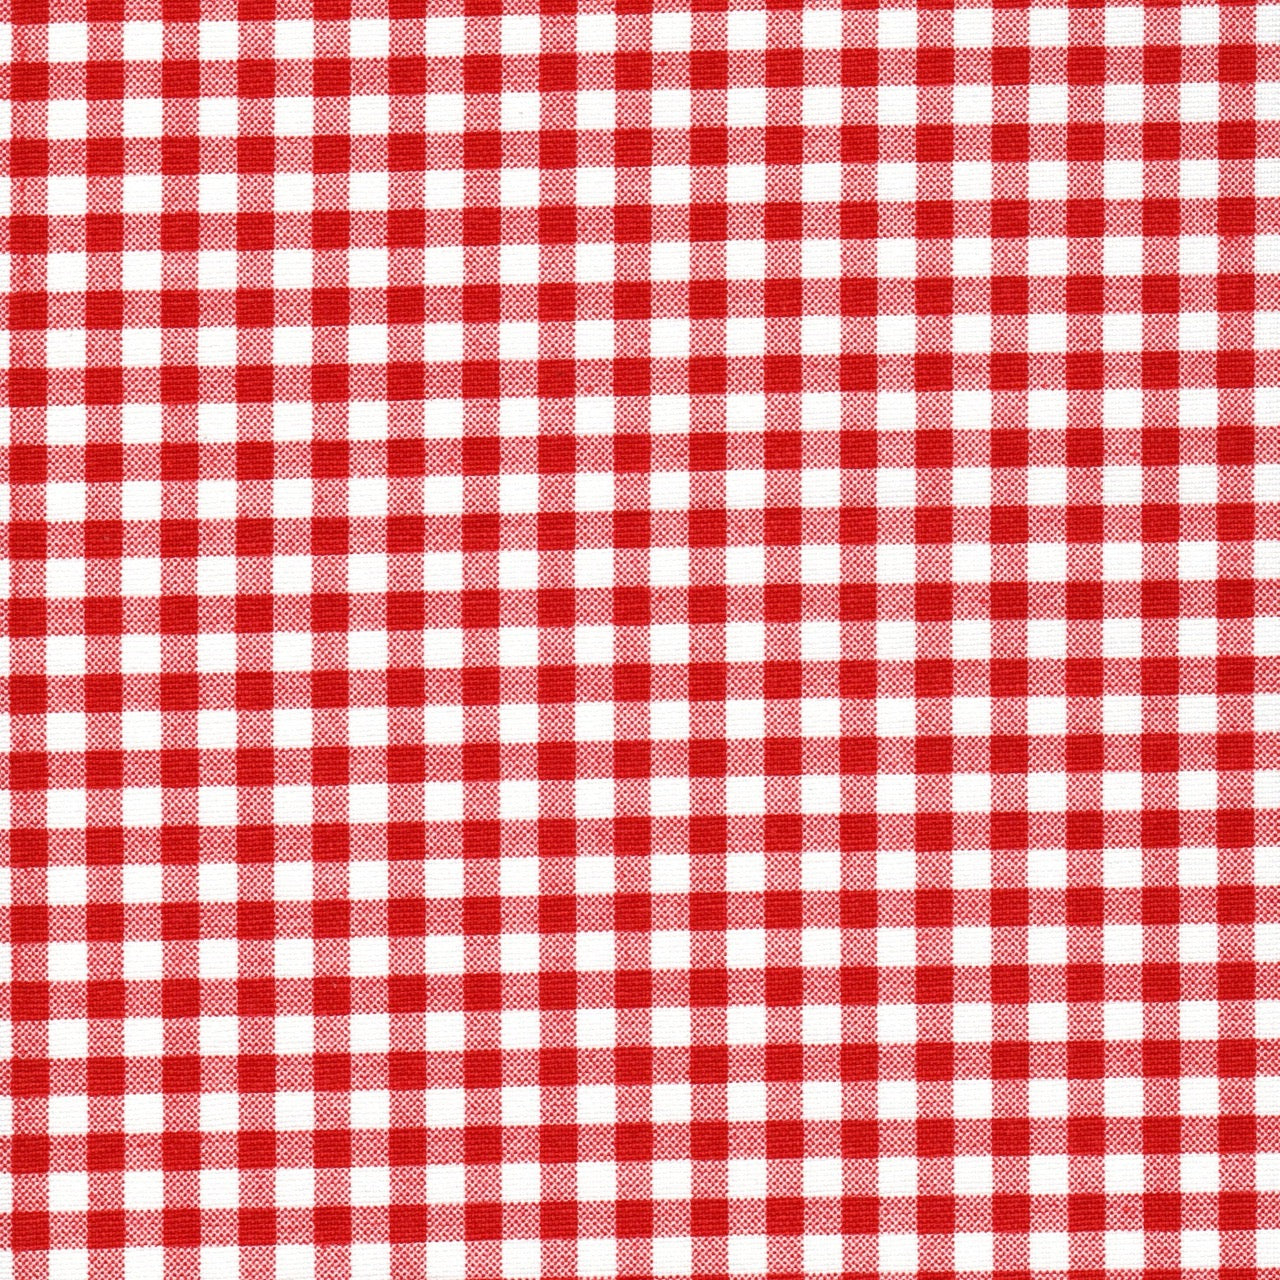 Duvet Cover in Lipstick Red Large Gingham Check on White